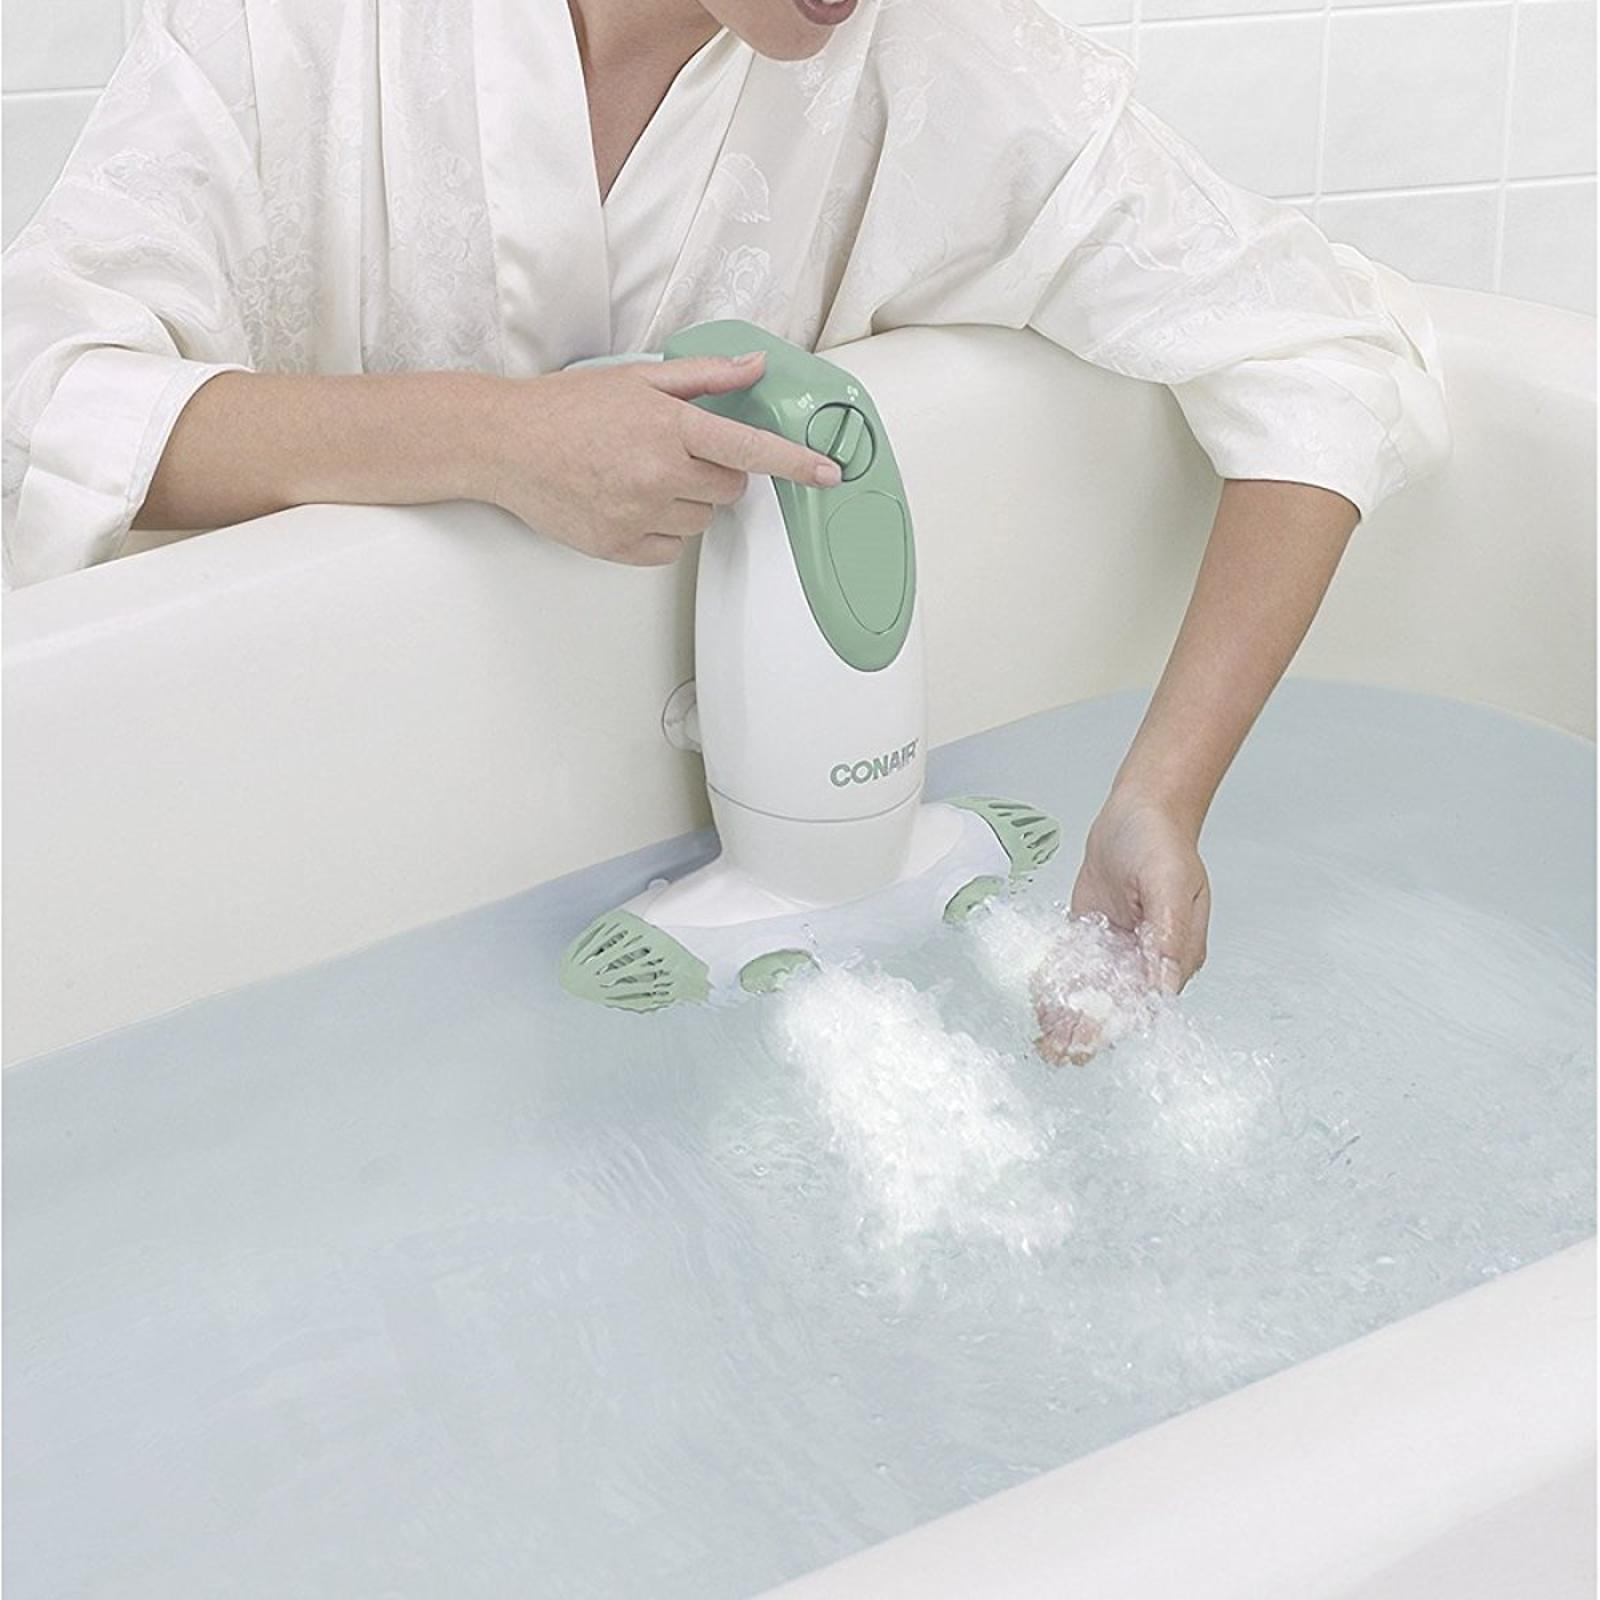 Turn your tub into a relaxing spa with Conair Dual Jet Bath Spa